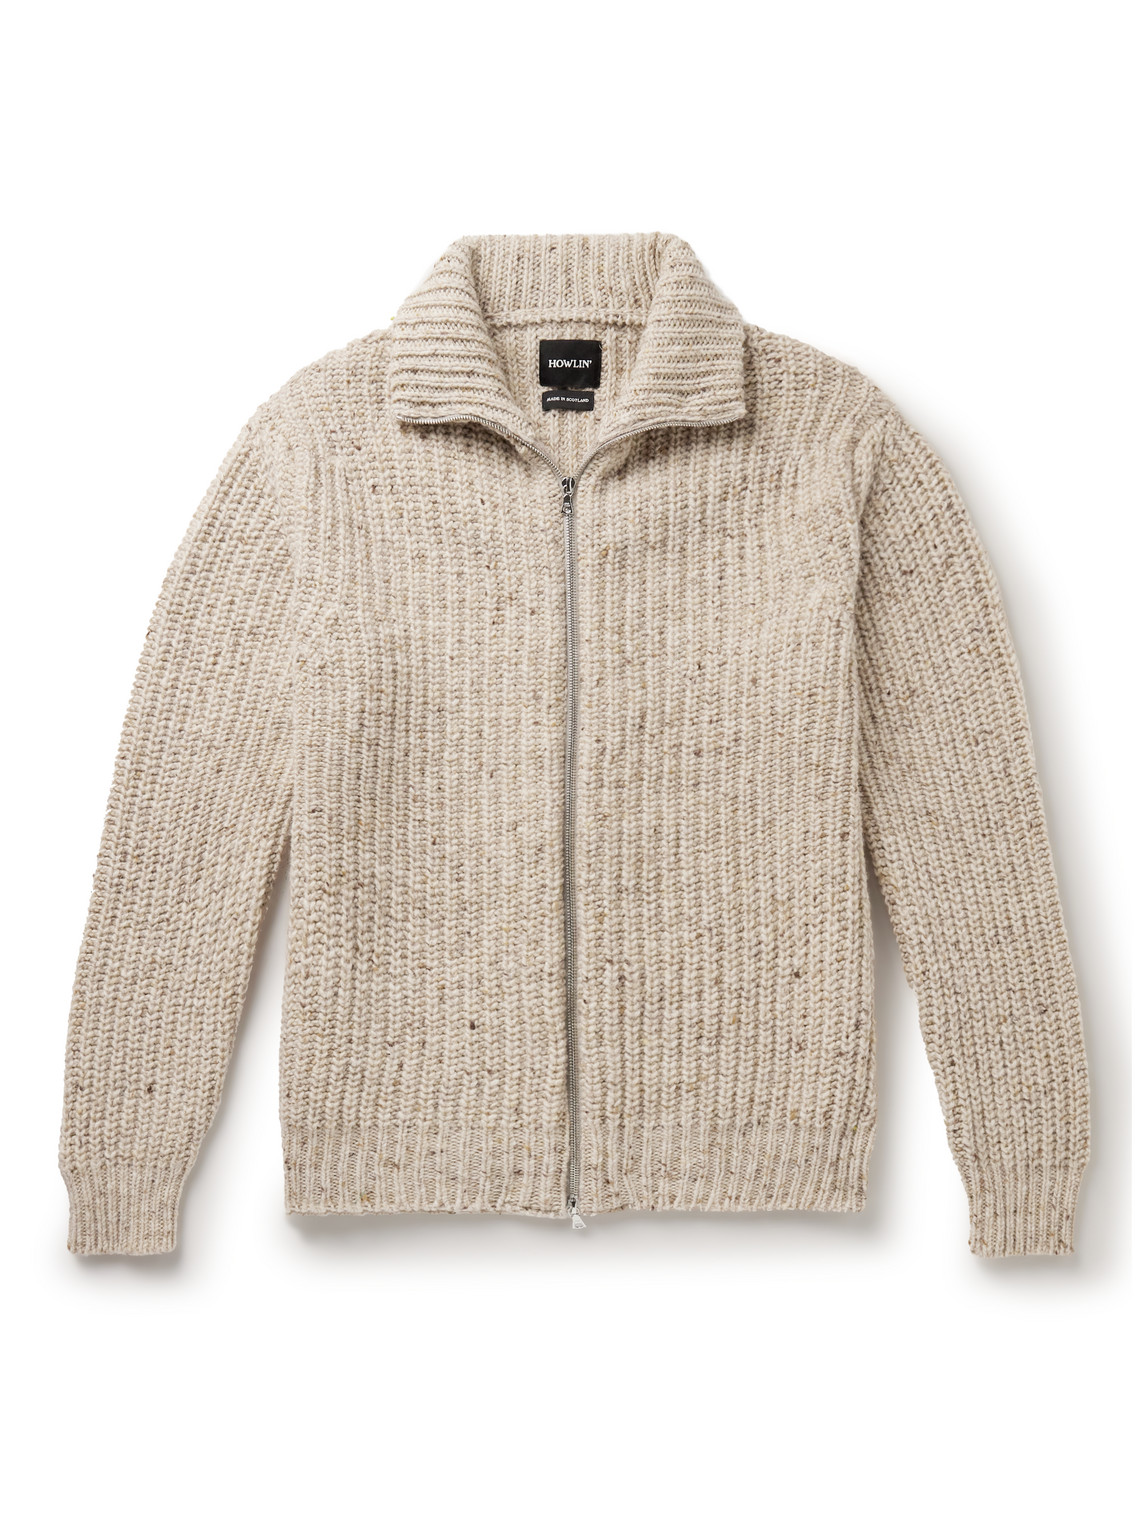 Howlin' Loose Ends Ribbed Donegal Wool Zip-up Cardigan In Neutrals